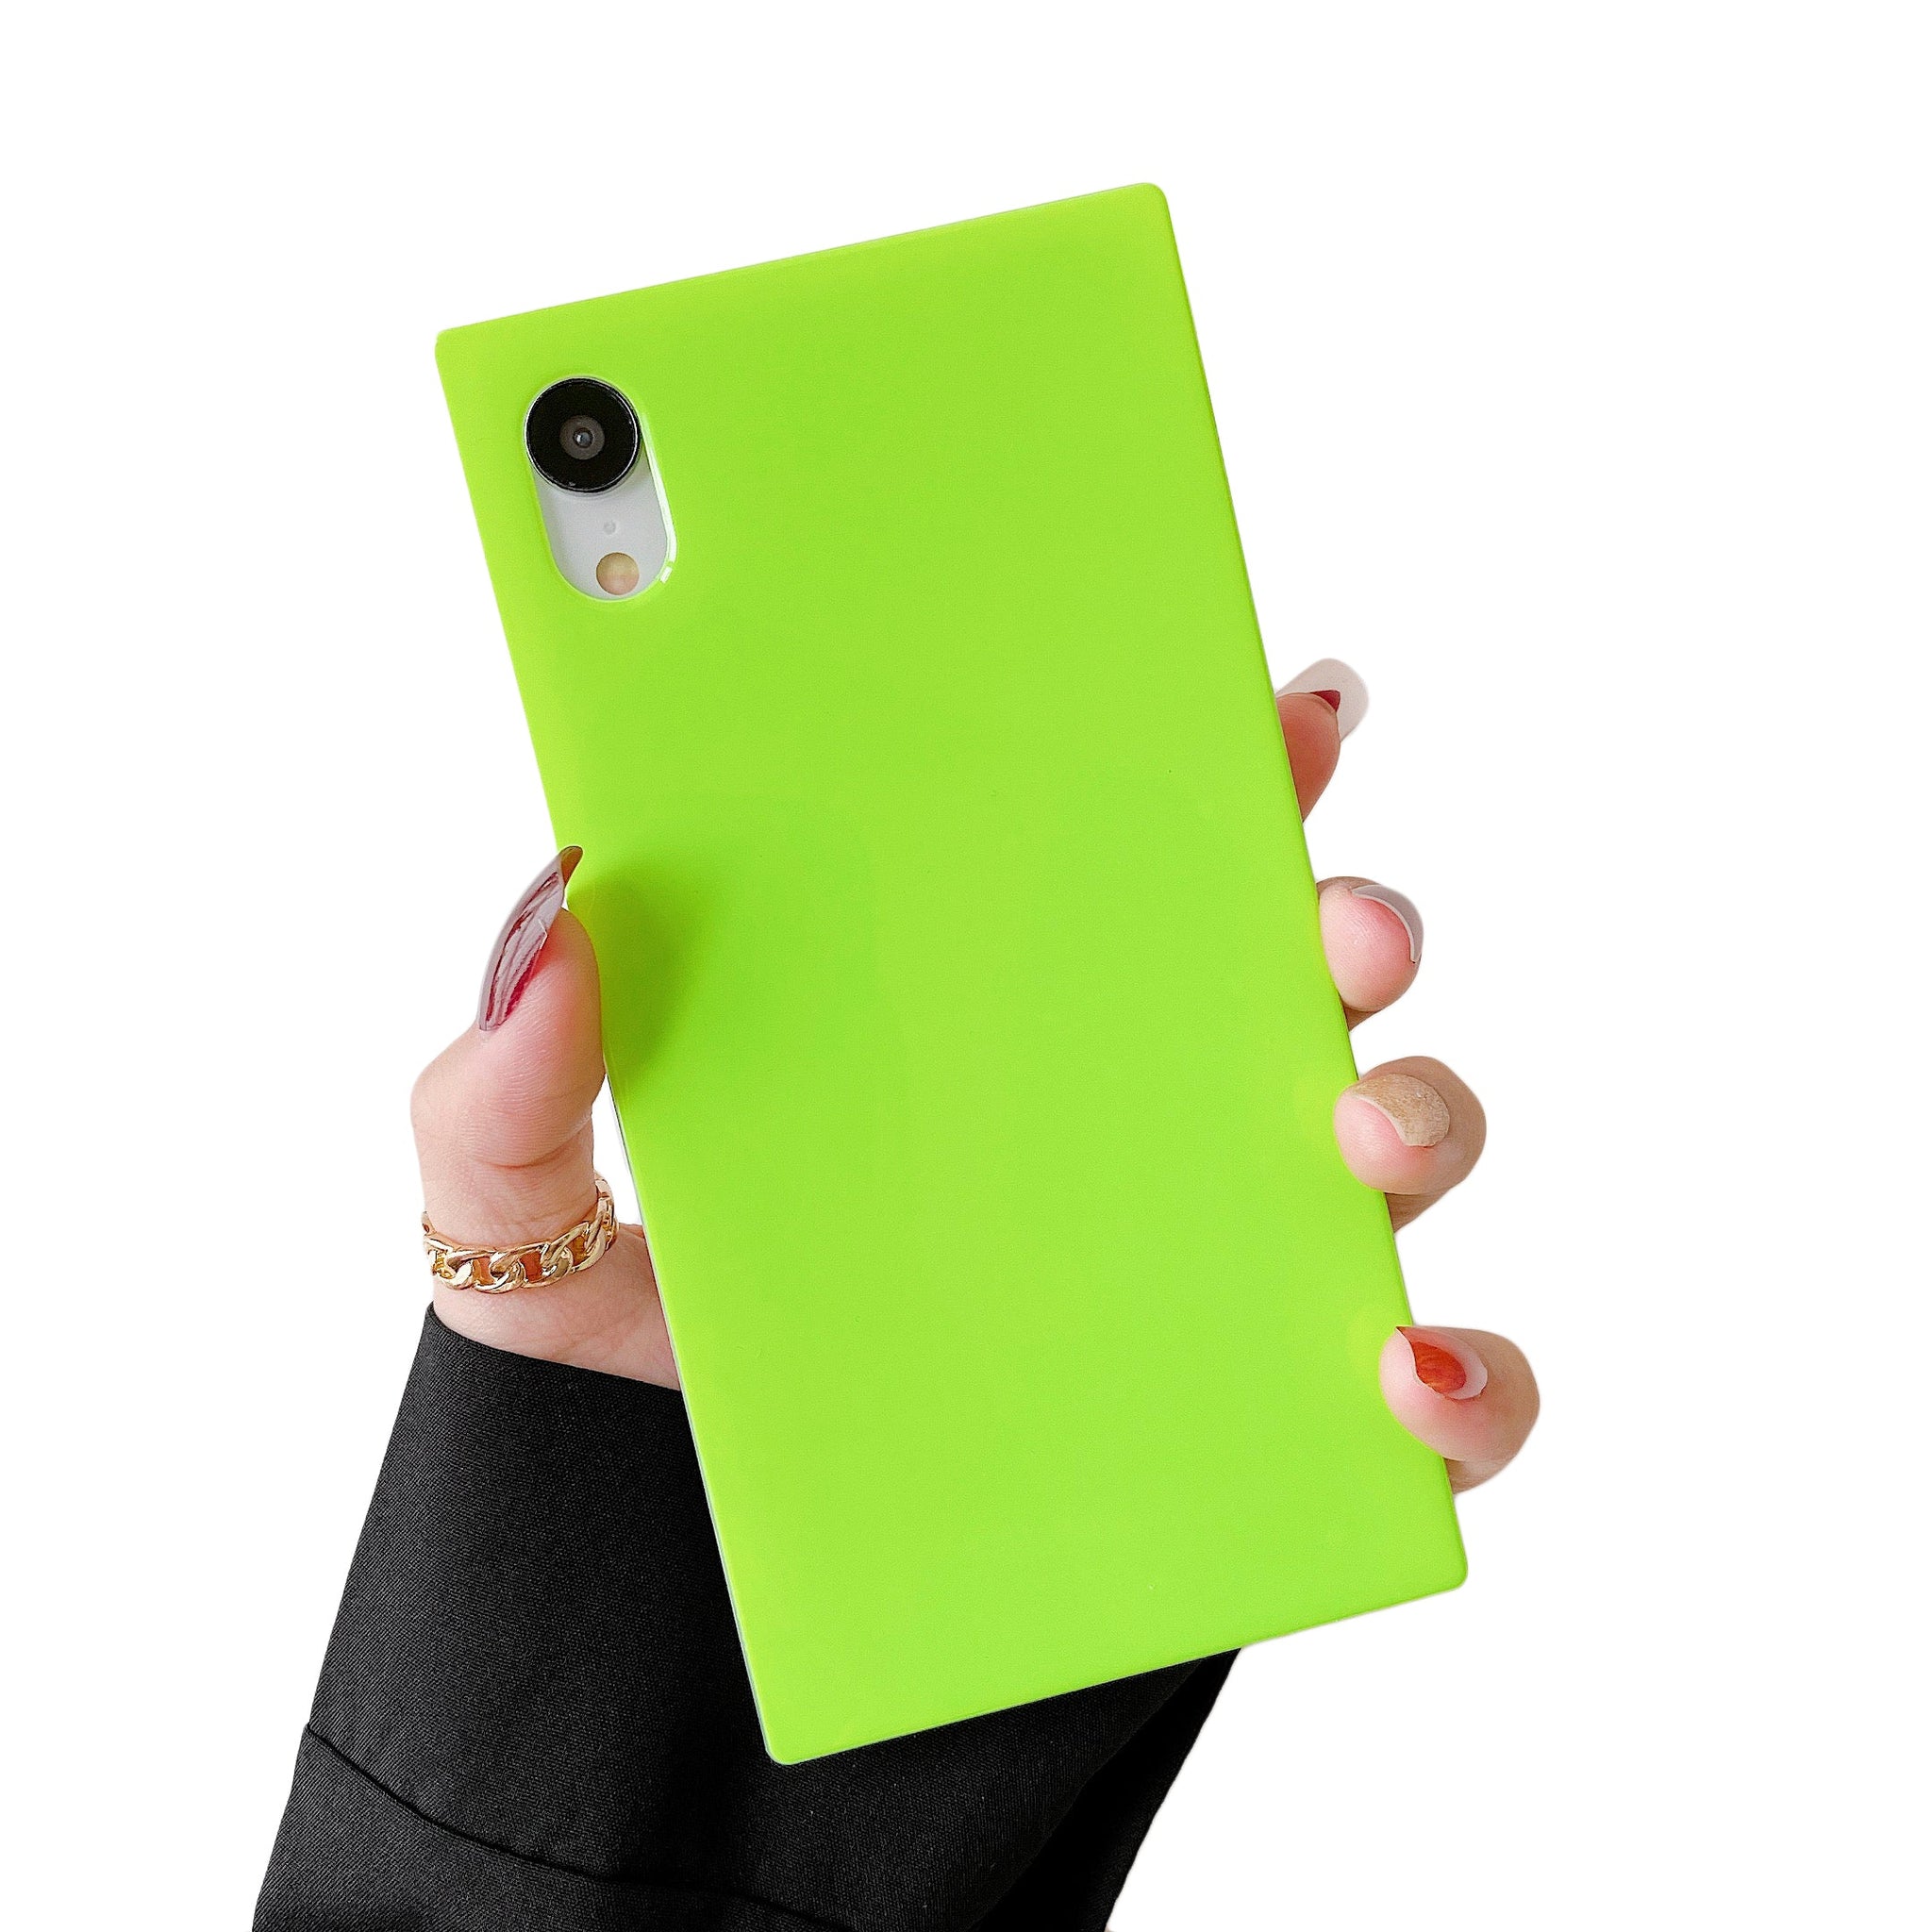 iPhone XS/iPhone X Case Square Neon Plain Color (Neon Green)